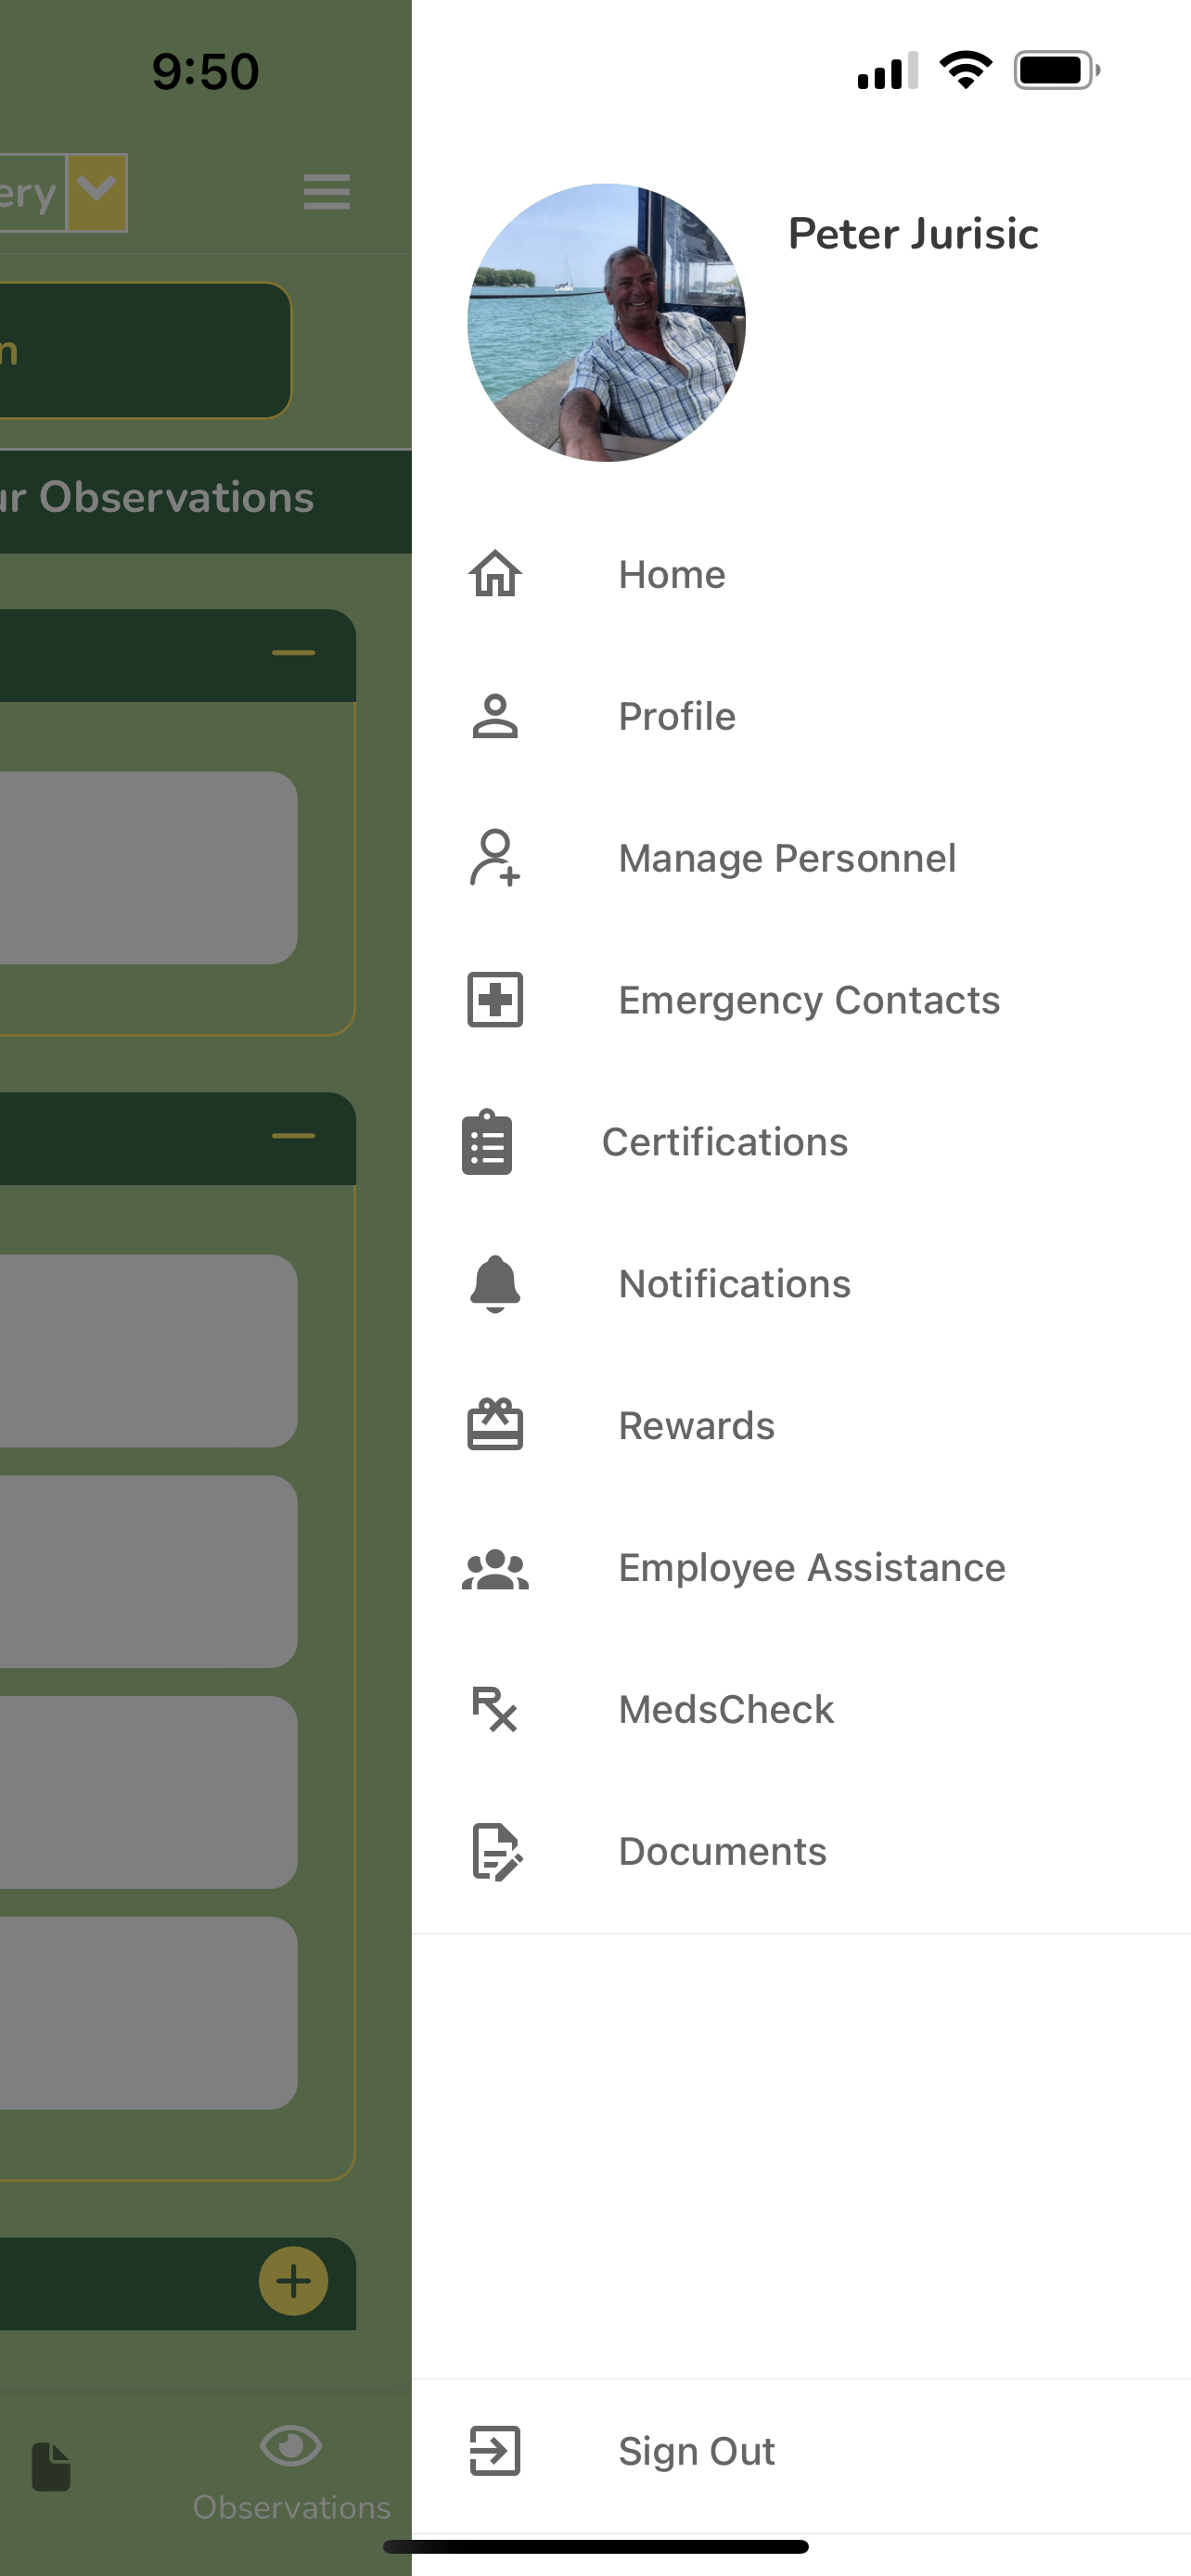 Get Digital:  Conduct inspections, update policies,  checklists, distribute work orders, assign tasks.